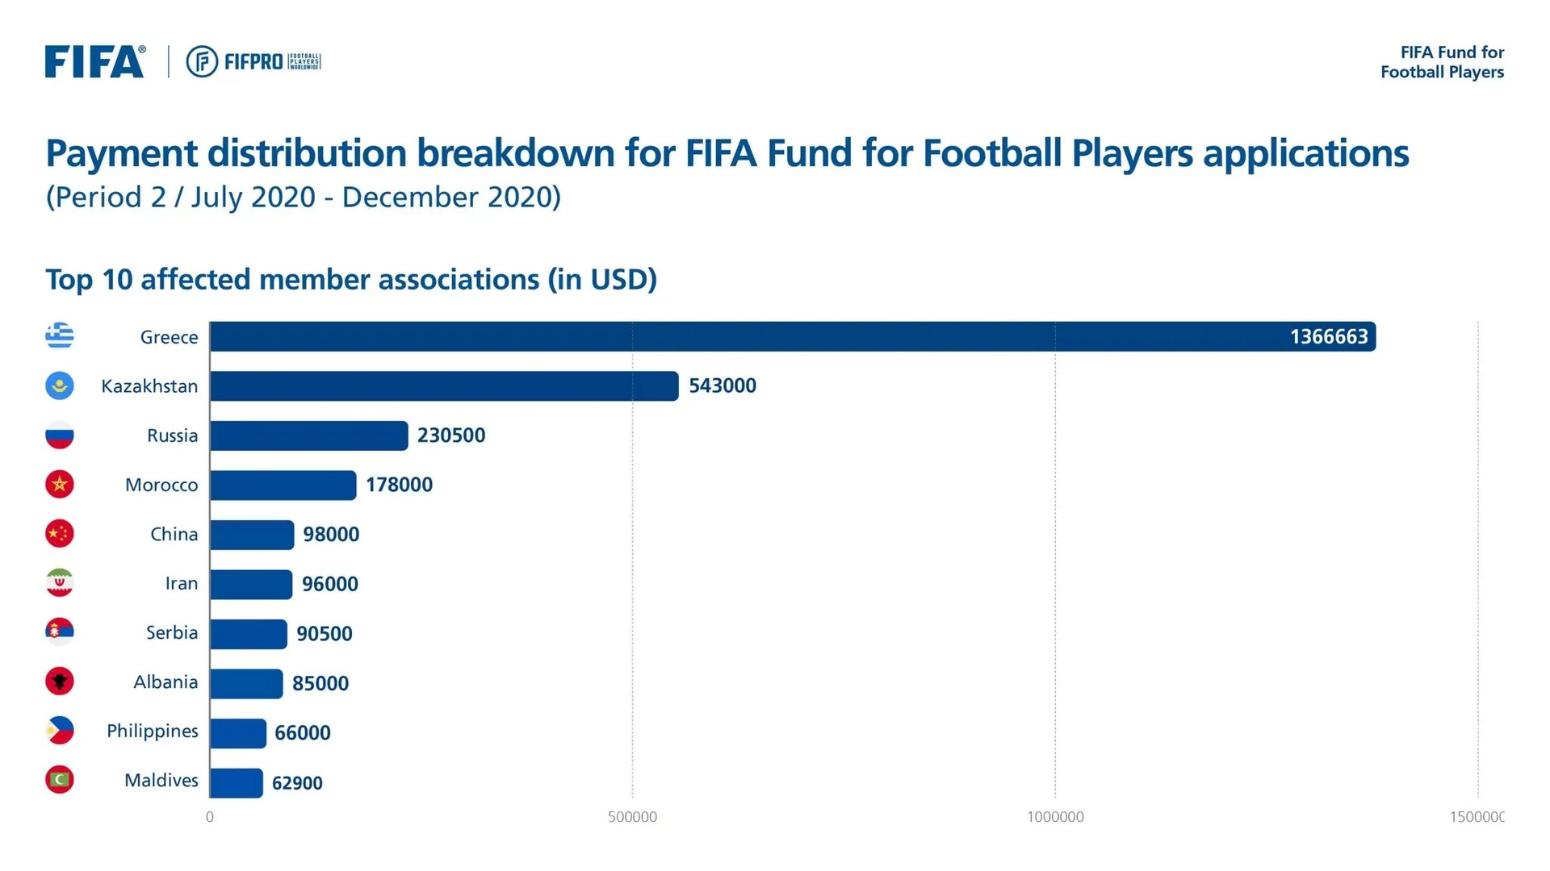 Greece: First in the world in debts to footballers!